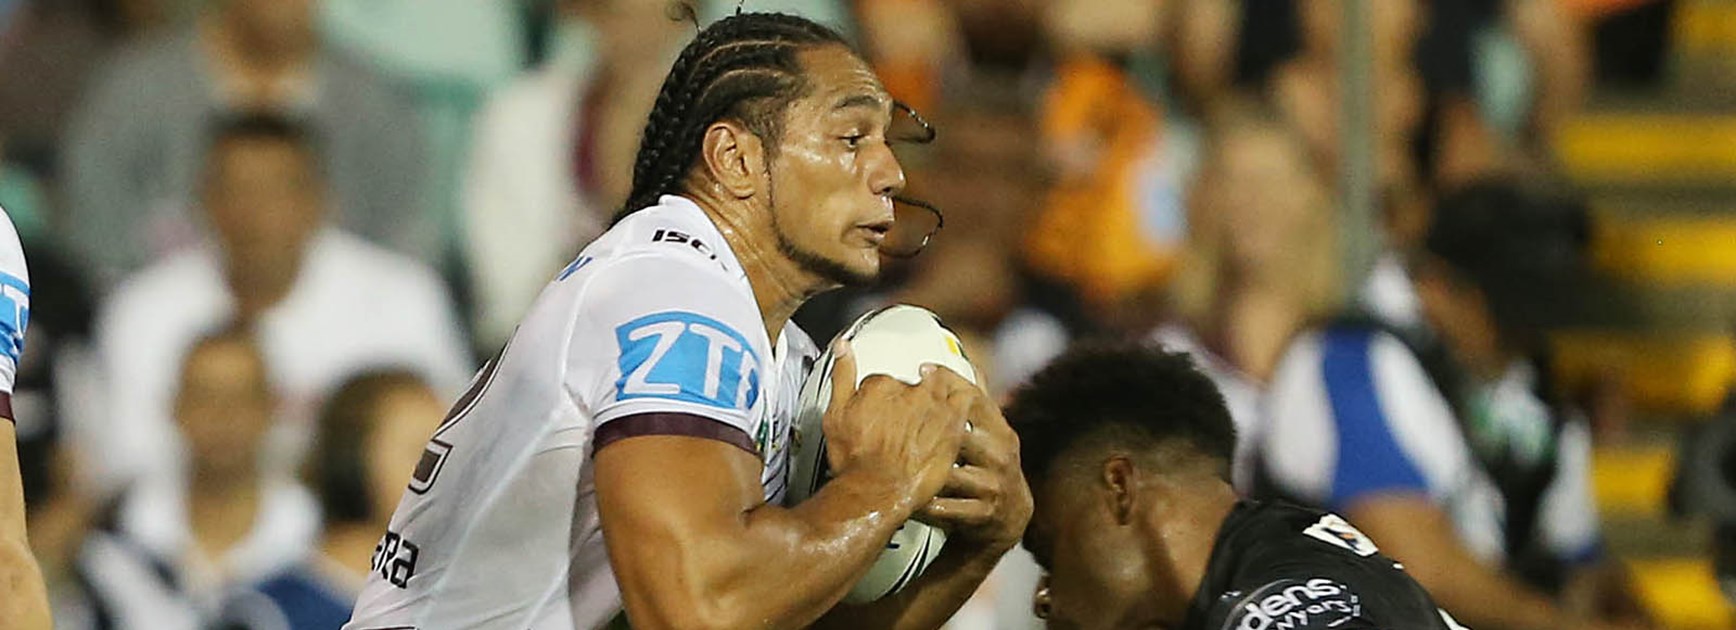 Manly recruit Martin Taupau had a massive game against his former Wests Tigers at Leichhardt Oval.